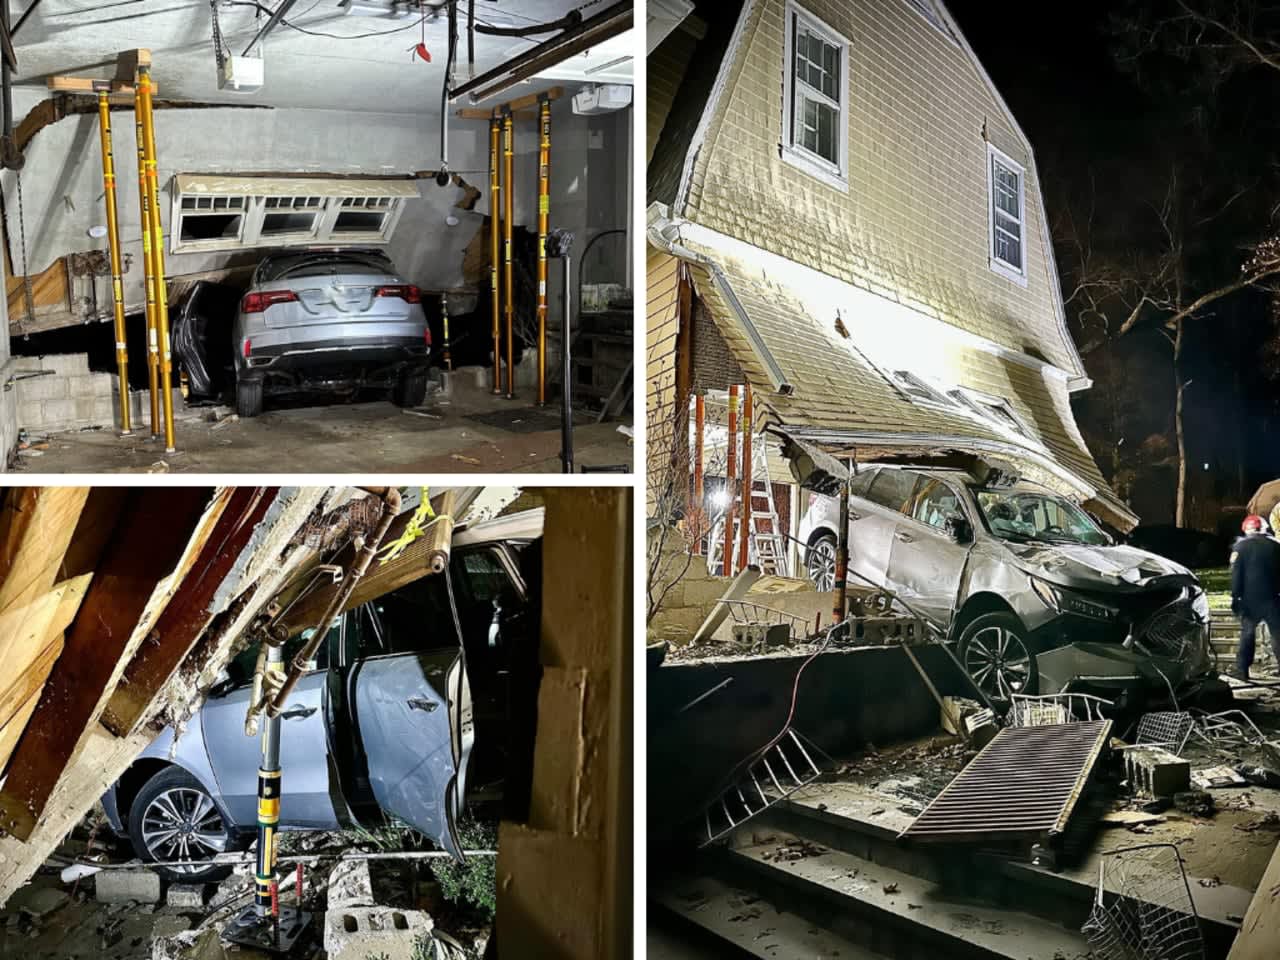 A car crashed into a building in Mount Kisco, requiring an intricate removal process.